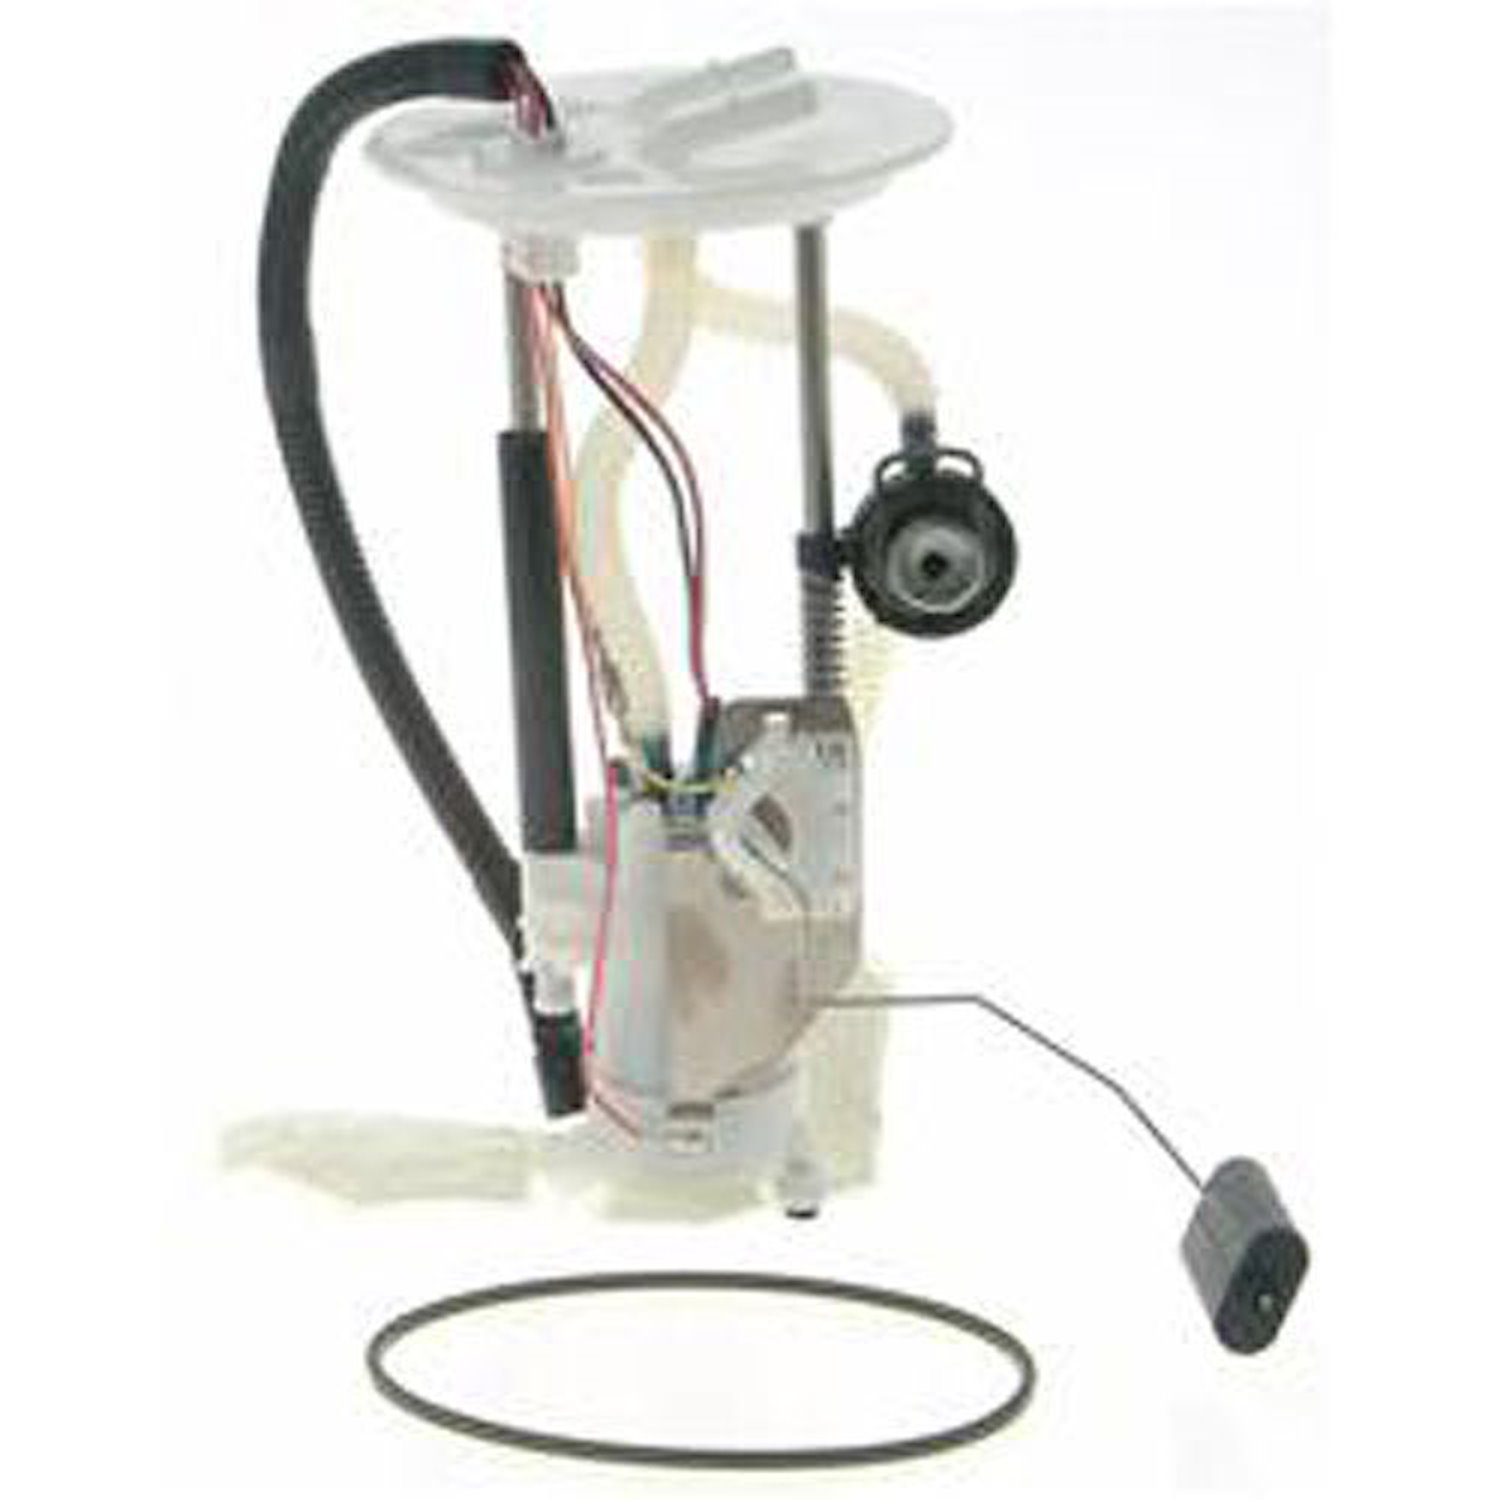 OE Ford Replacement Electric Fuel Pump Module Assembly 2003-04 Ford Expedition 5.4L V8